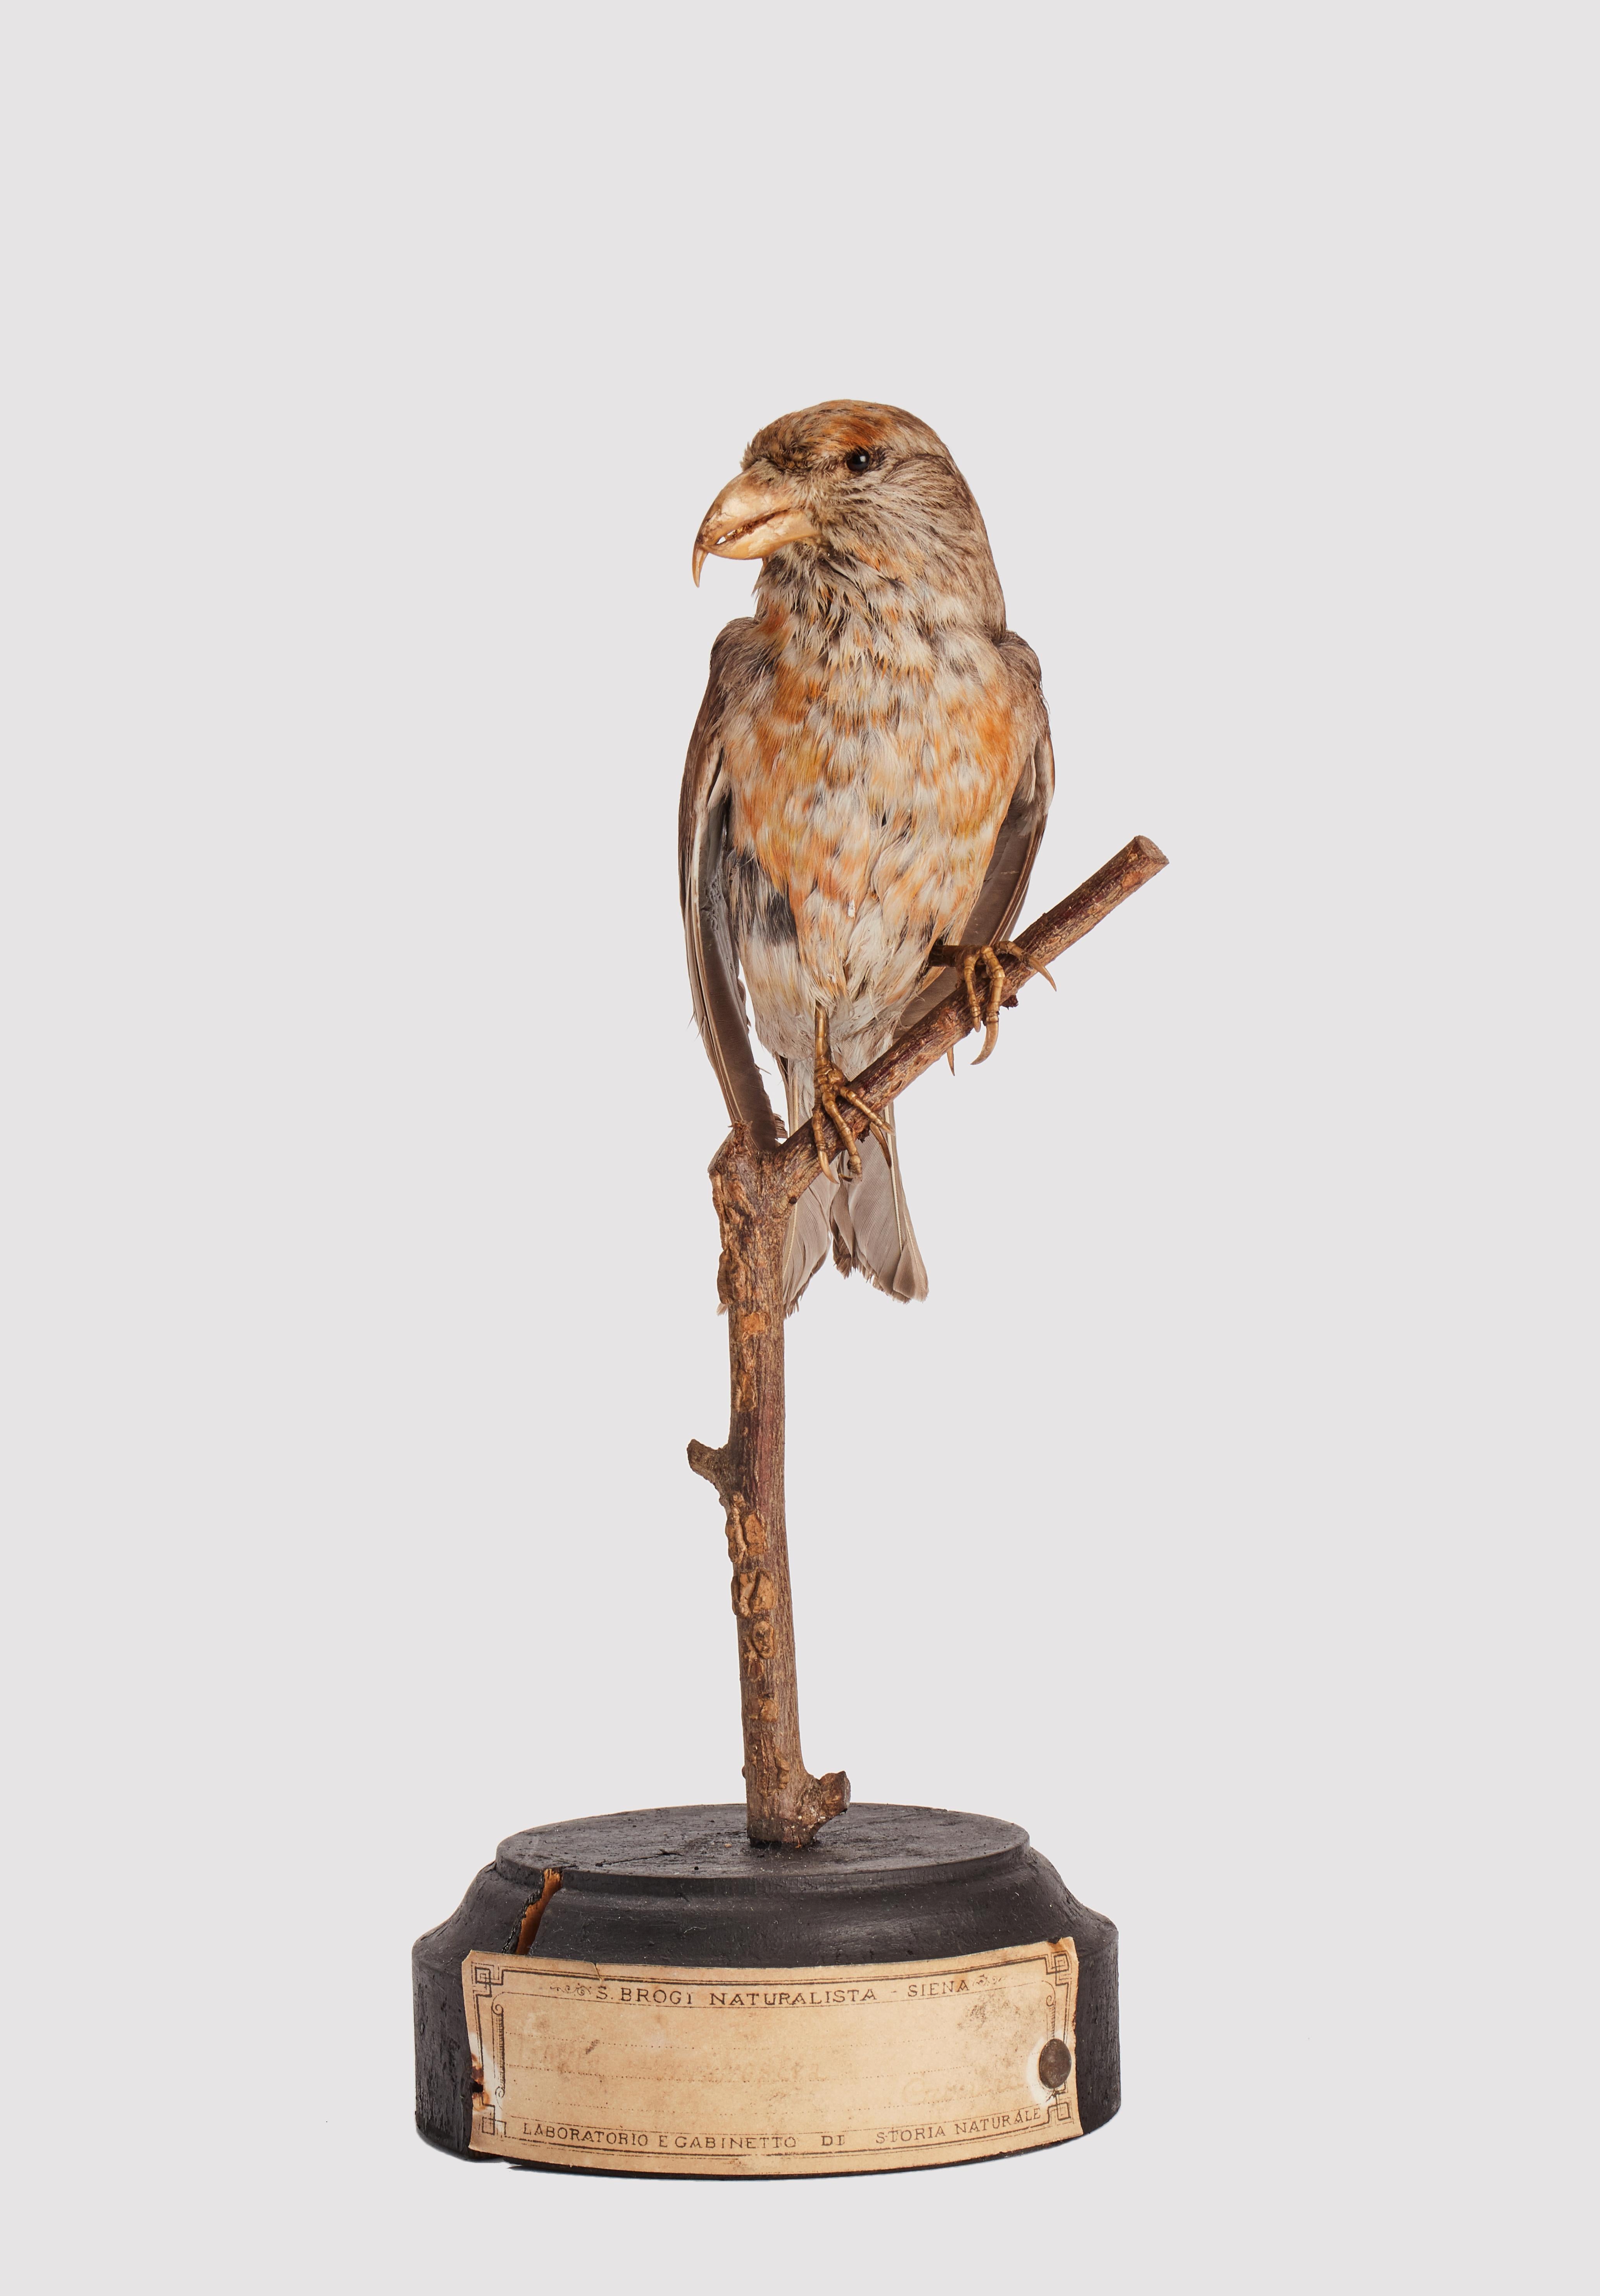 Natural specimen from Wunderkammer Stuffed bird (Passer domesticus) House sparrow mounted on a wooden base with cartouche Specimen for laboratory and Natural history cabinet. S. Brogi Naturalista. Siena, Italy 1880 ca.

